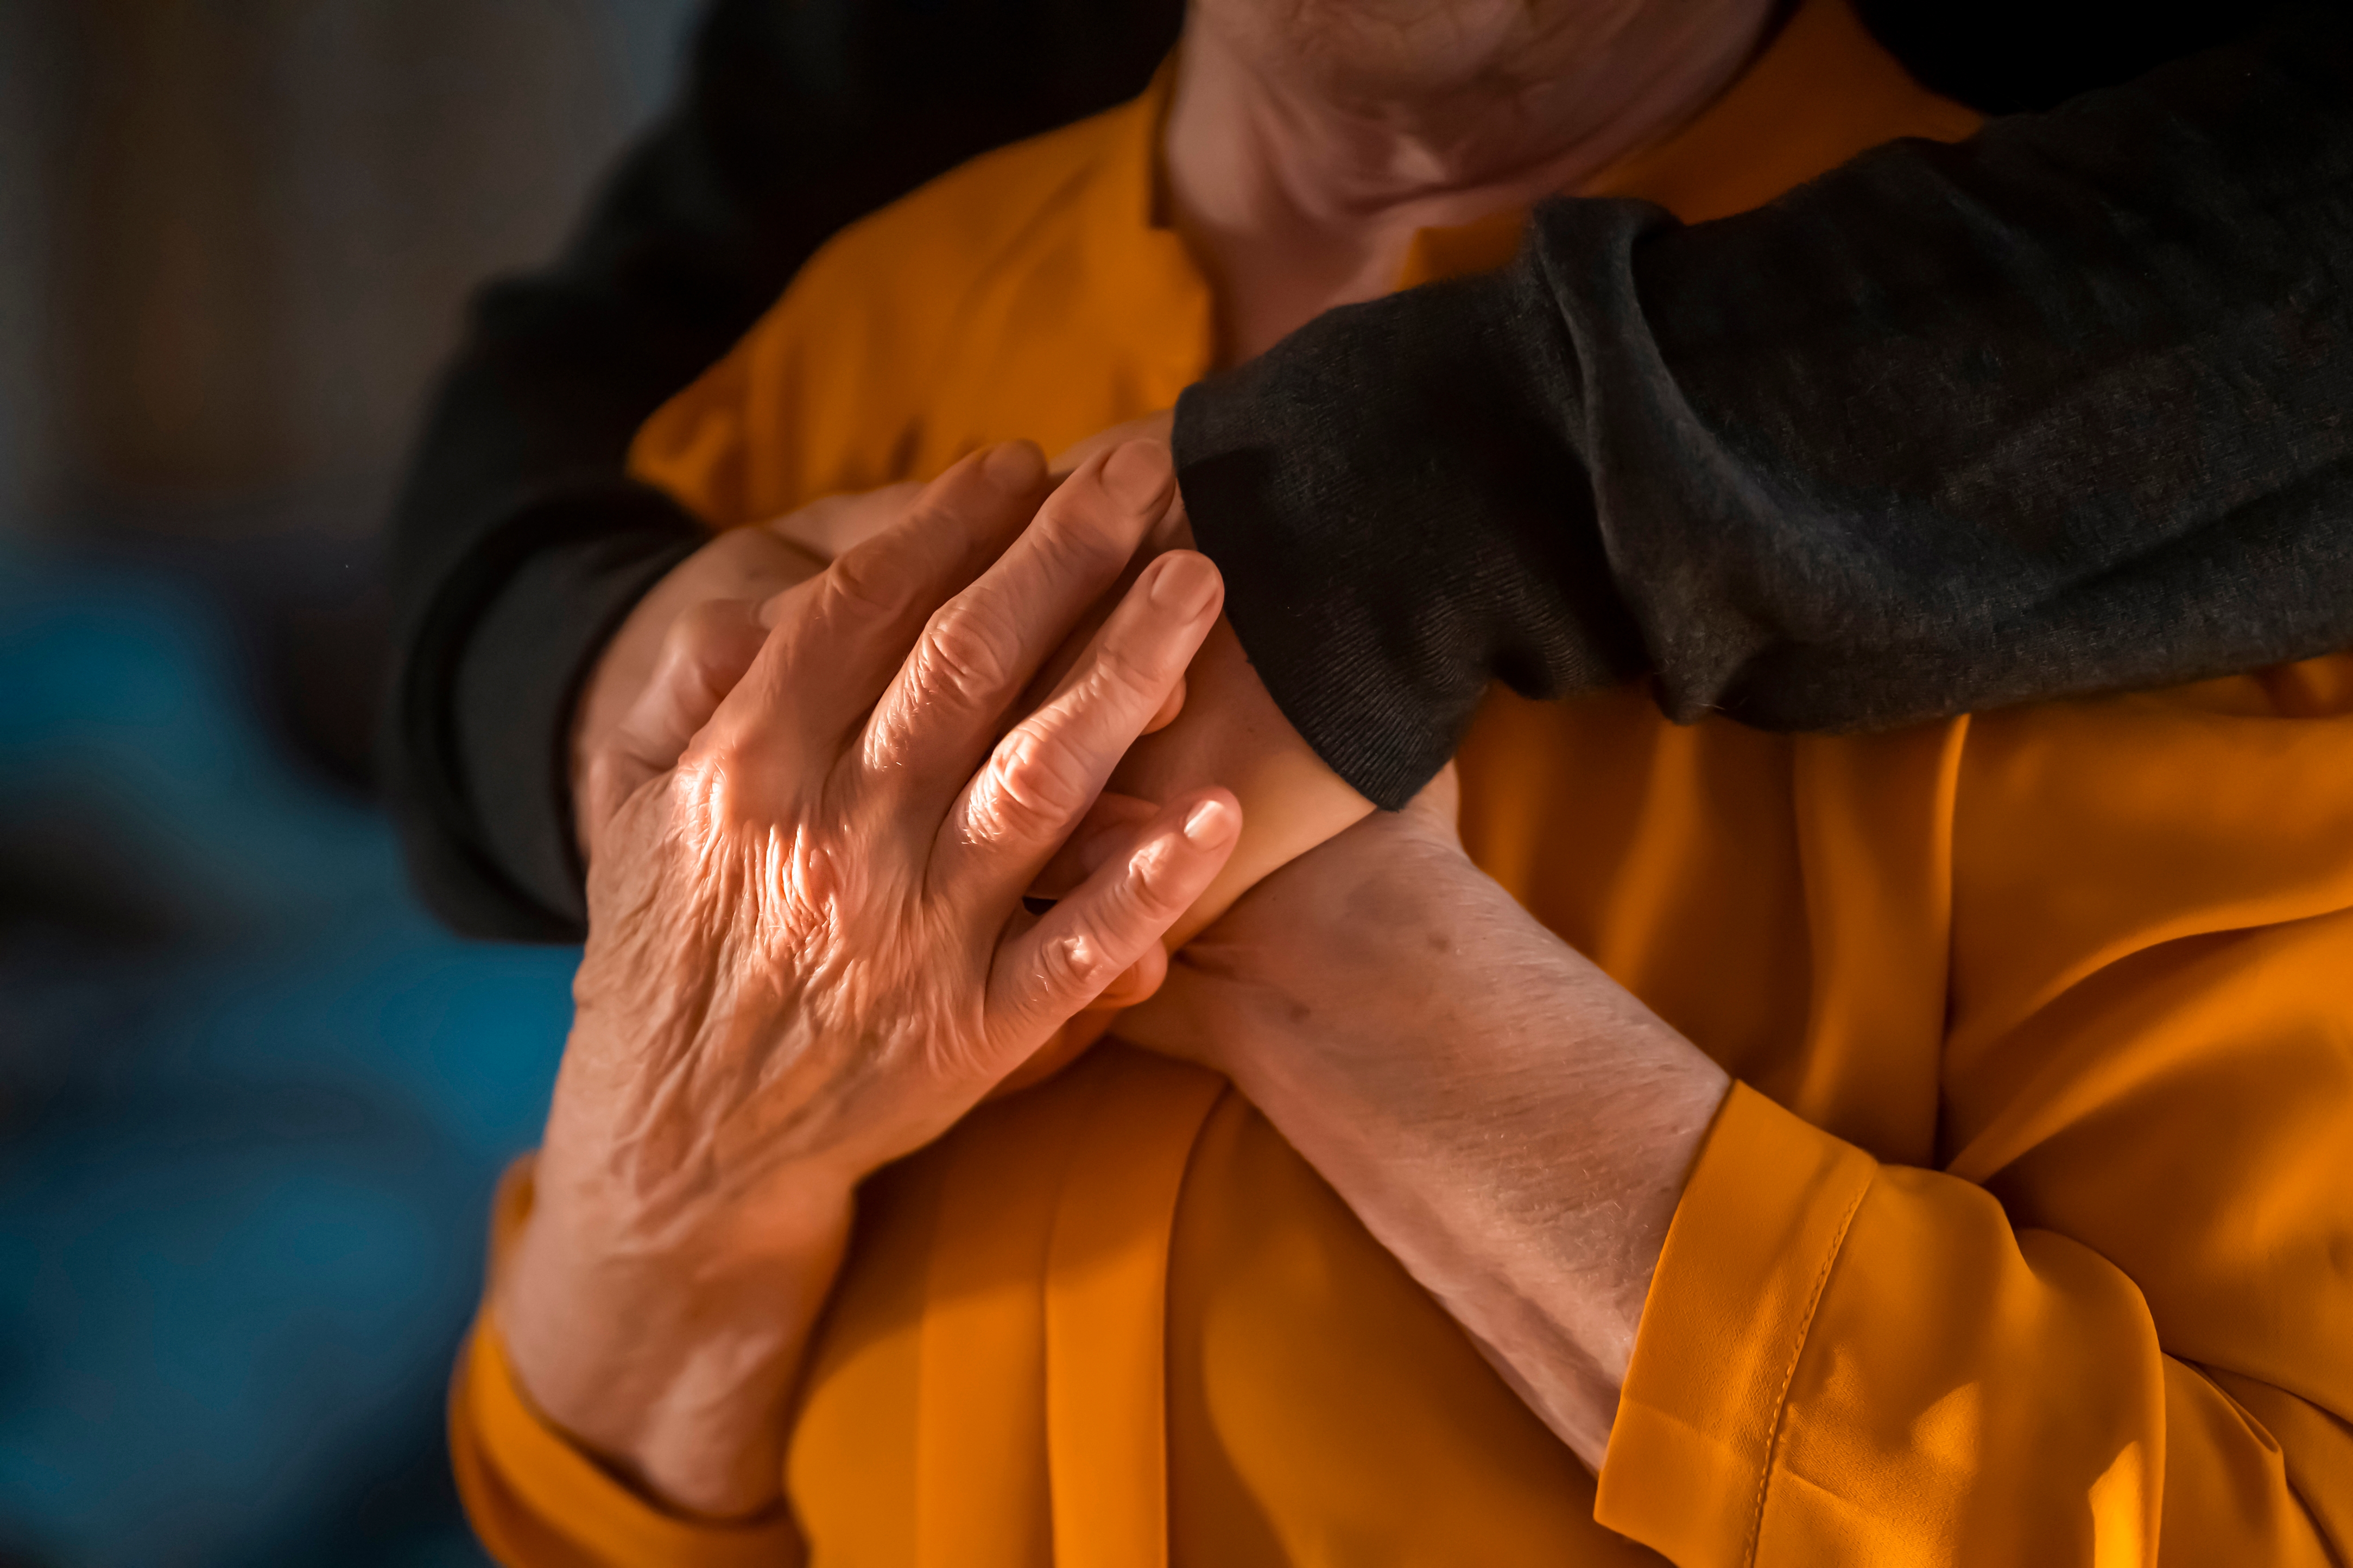 A senior mom holding her son's hands as a gesture of comfort and support | Source: Shutterstock